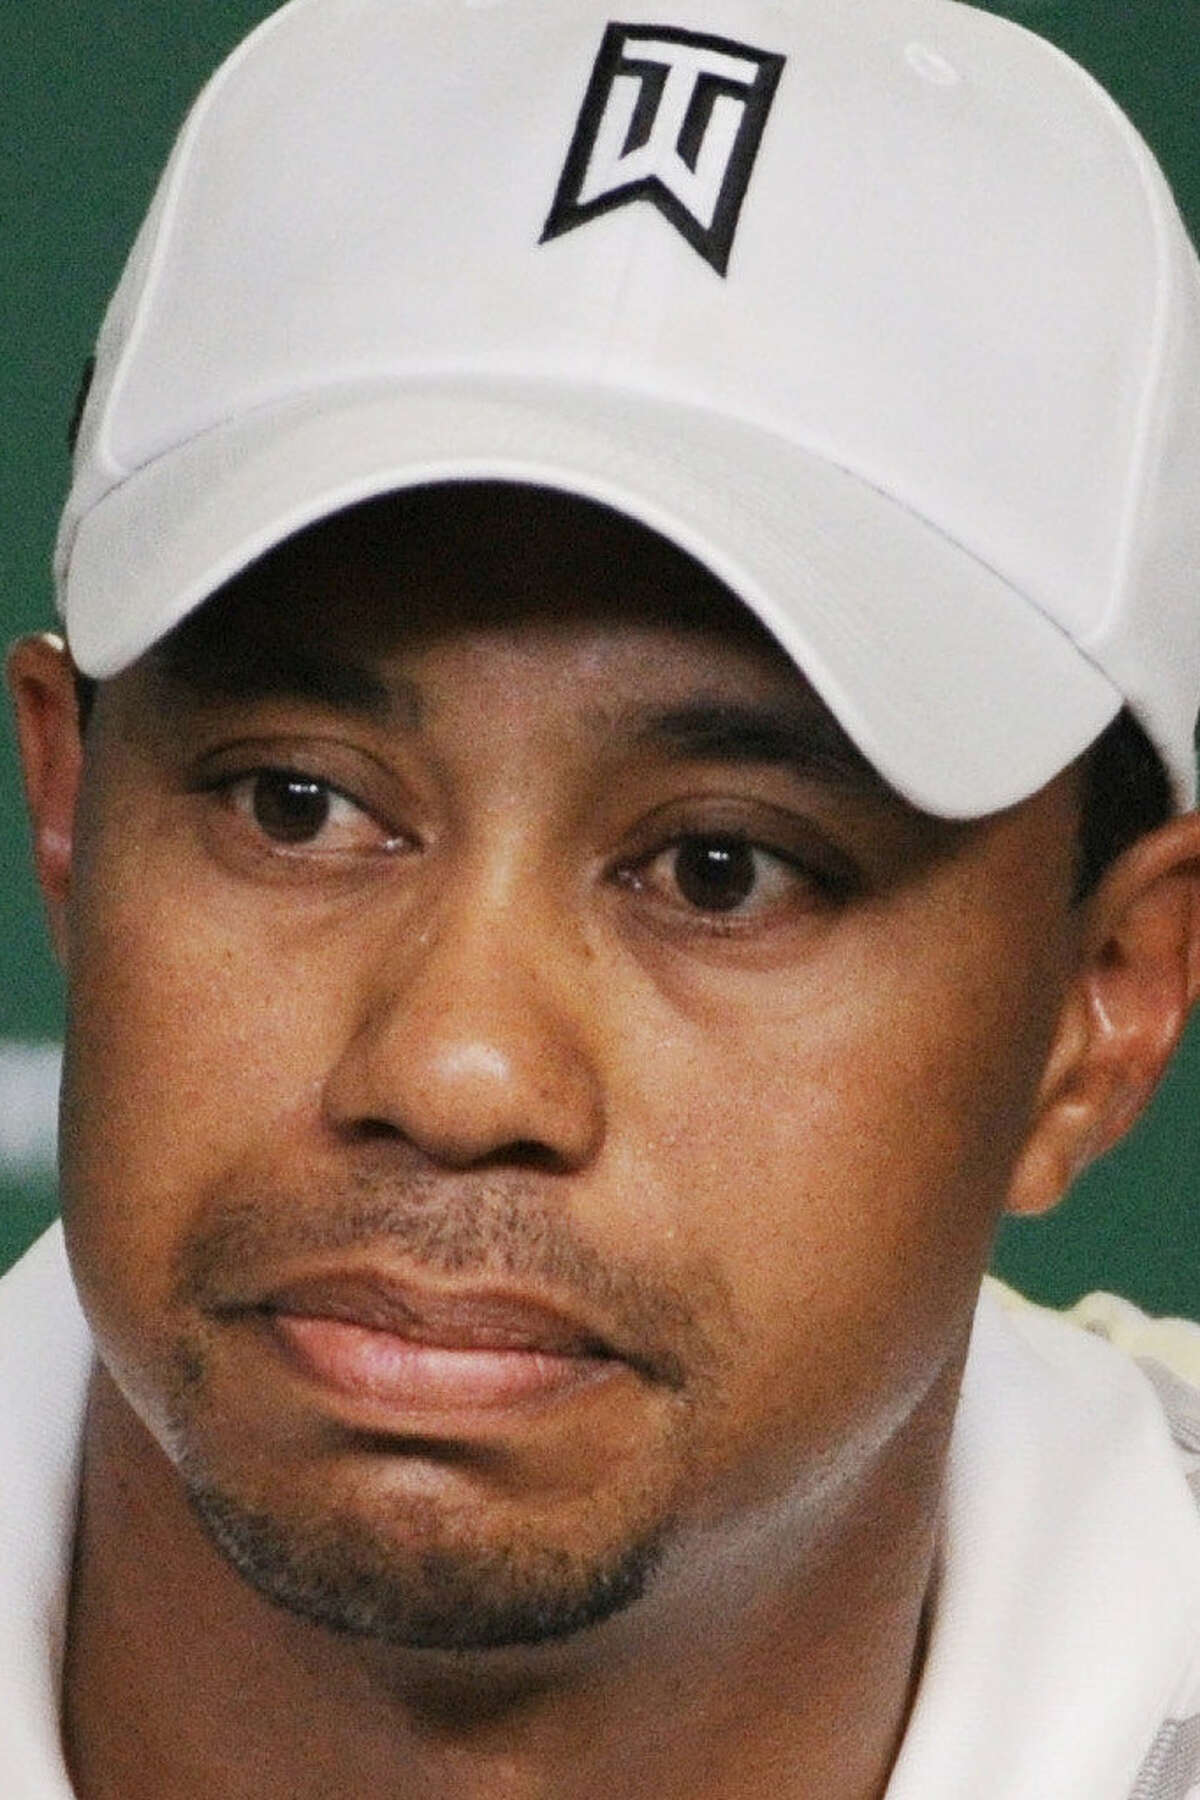 World No. 1 Tiger Woods, winner of four green jackets, will miss the Masters for the first time.